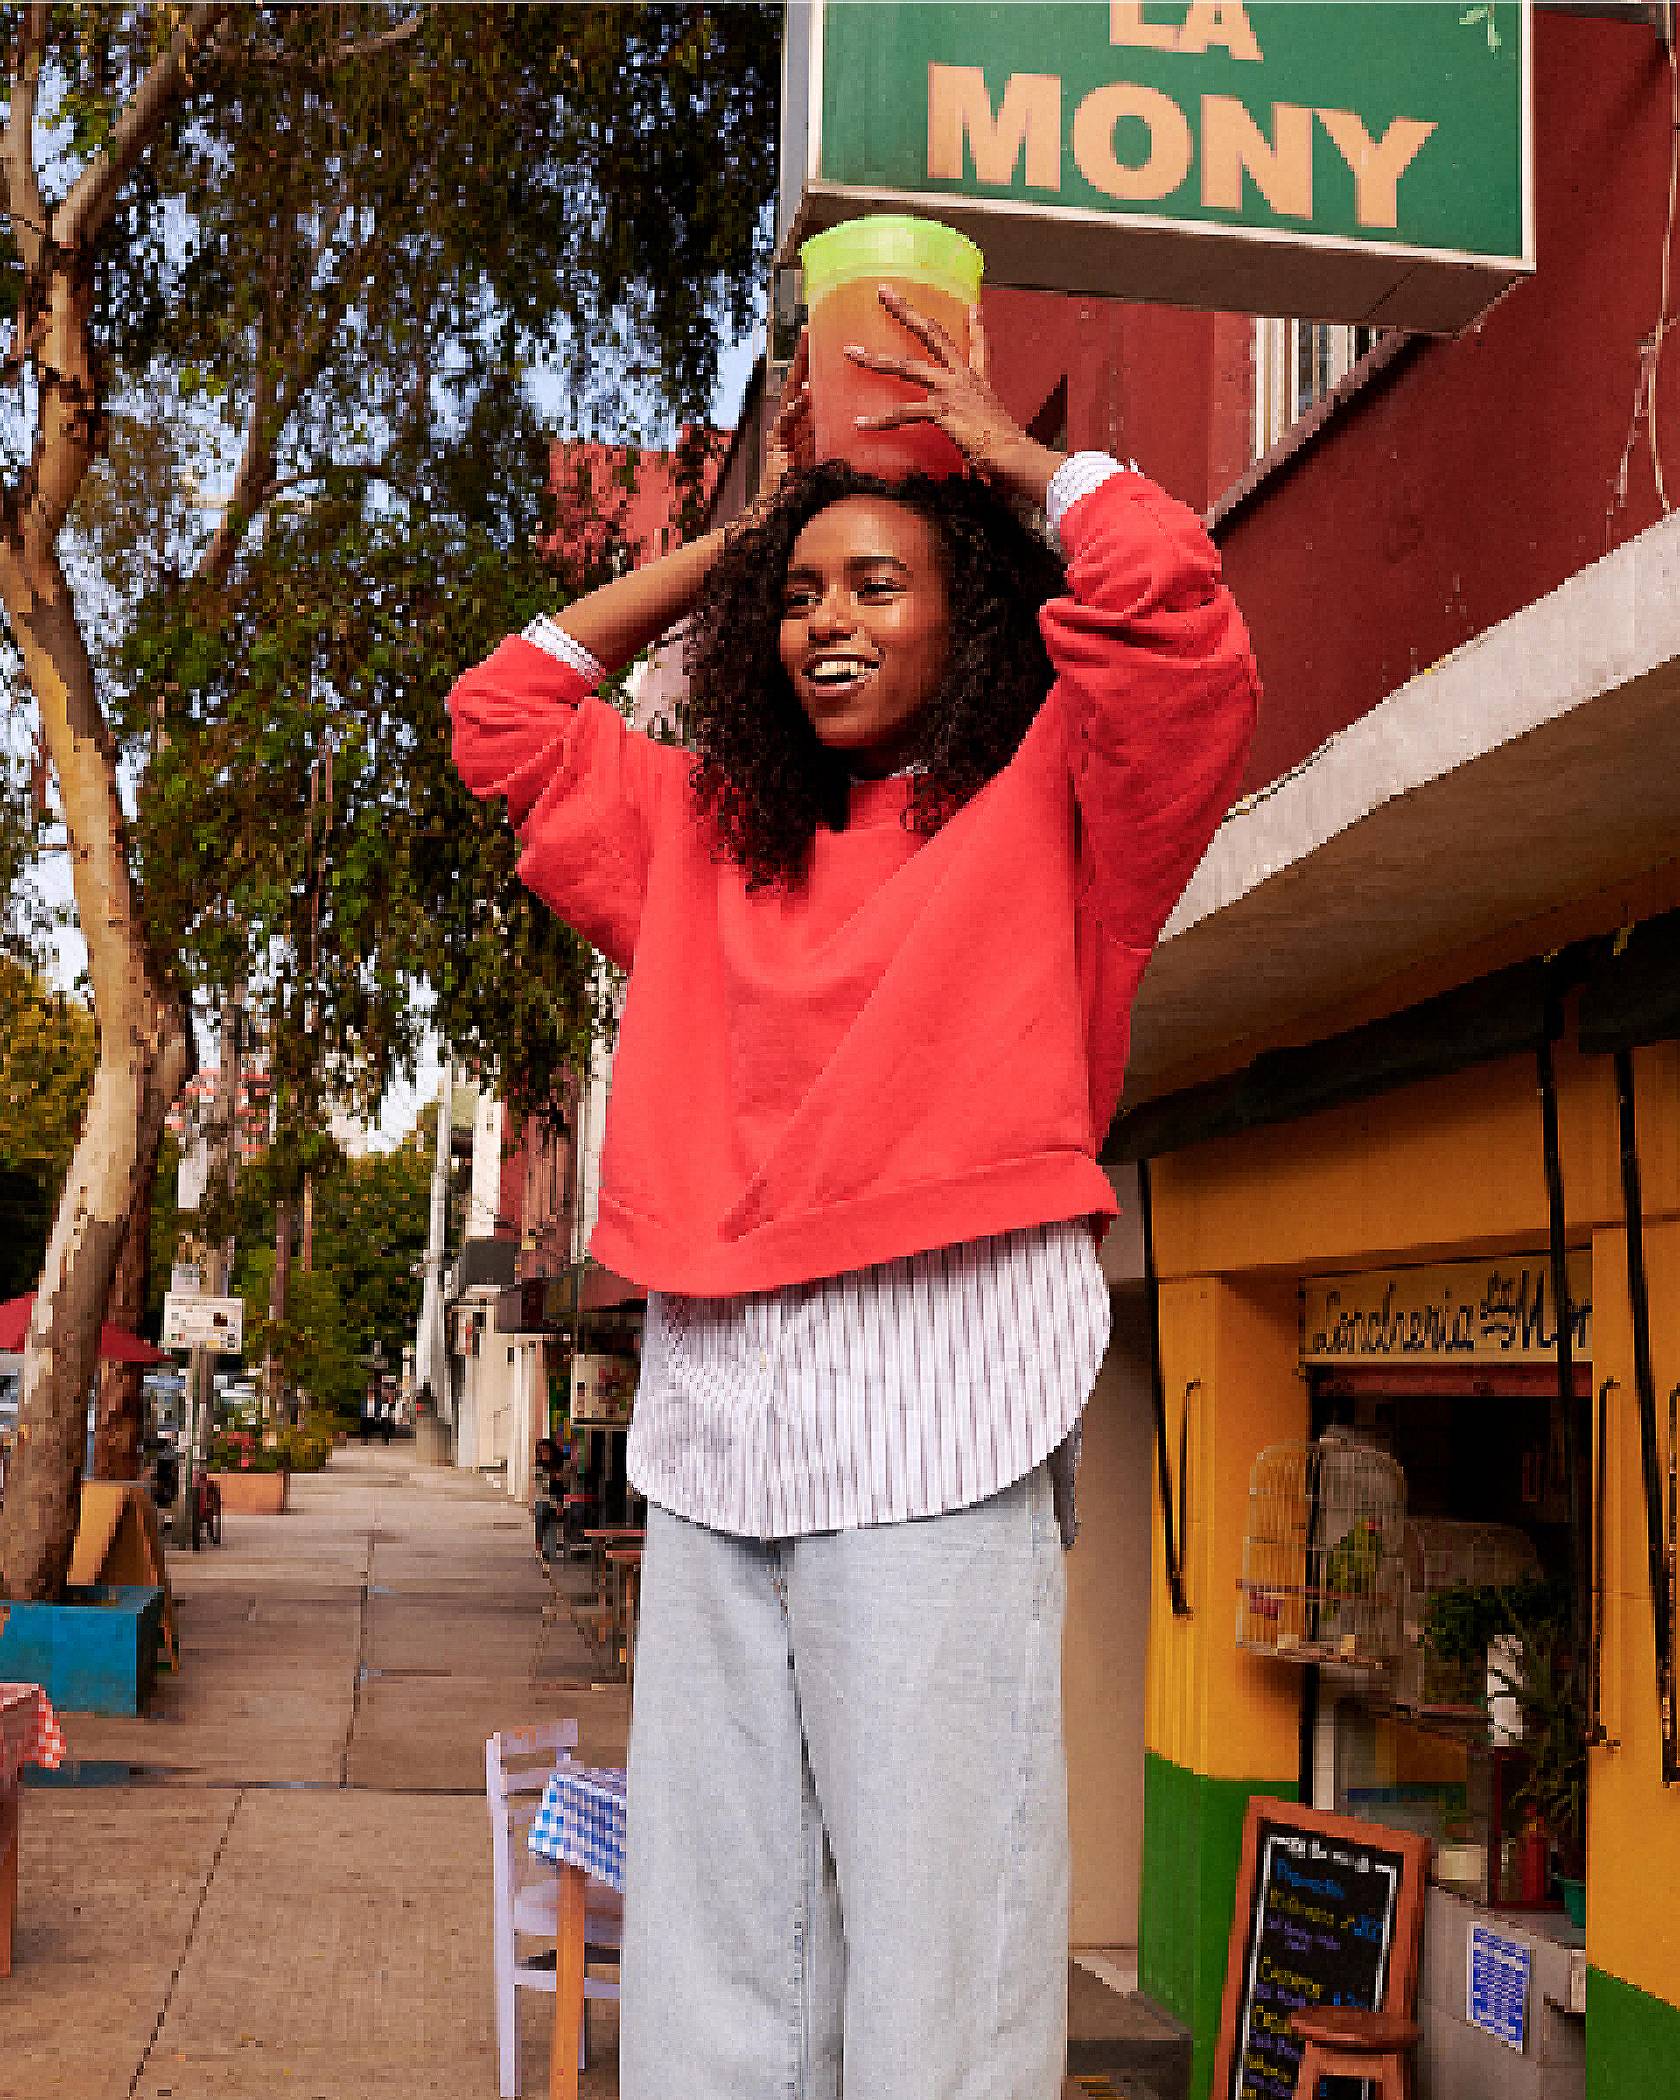 Woman wearing an orange sweatshirt and holding a pitcher of liquid over her head.